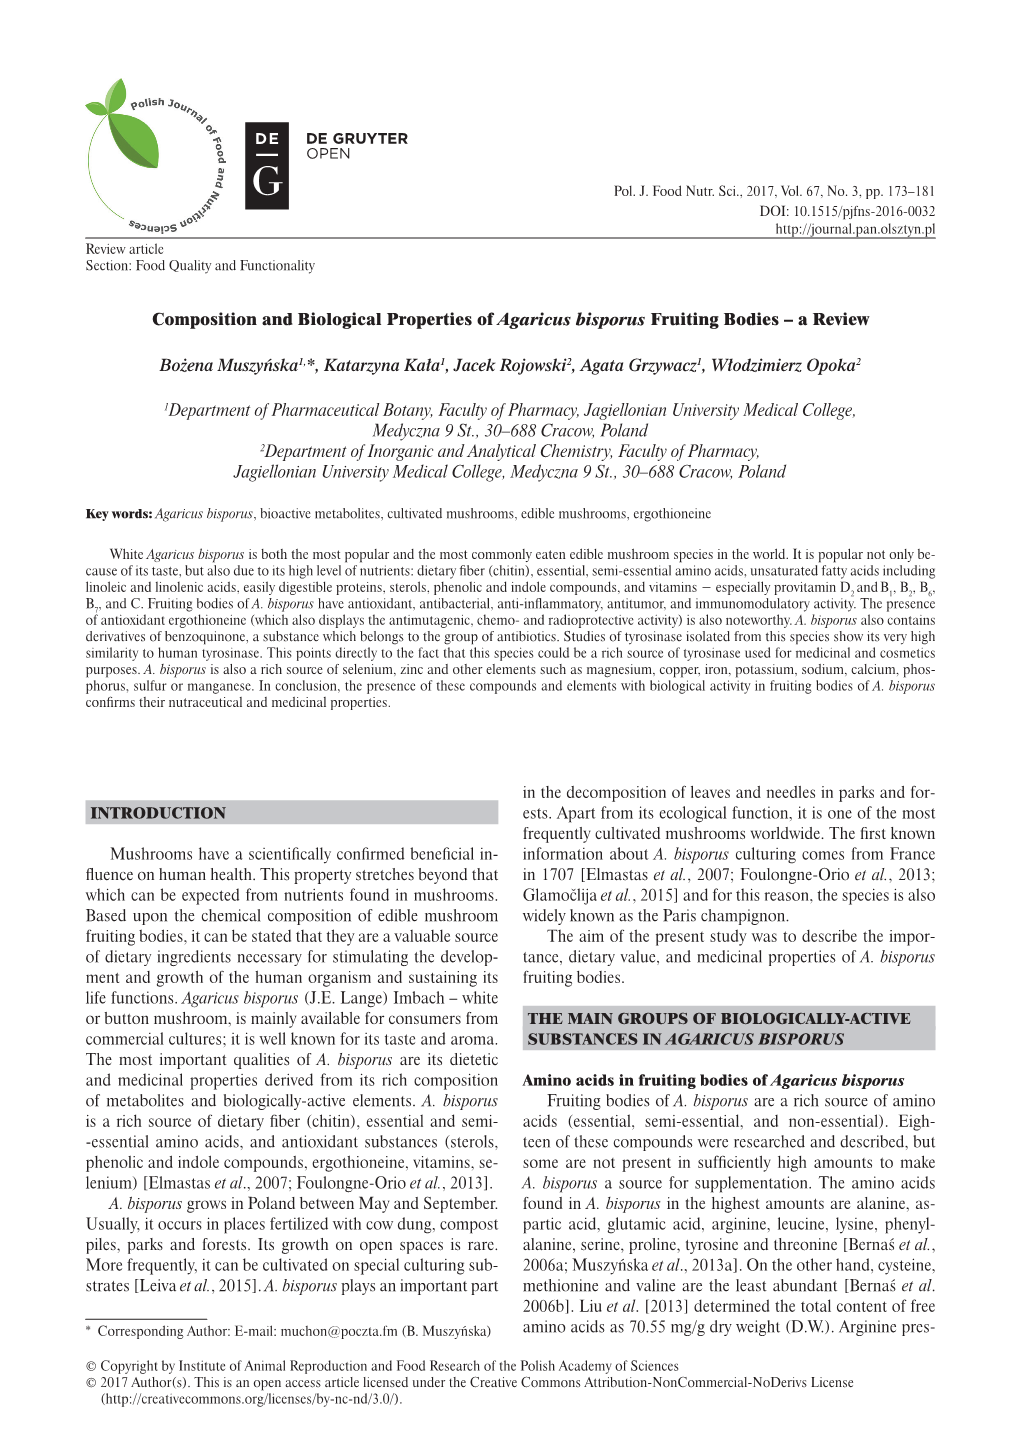 Composition and Biological Properties of Agaricus Bisporus Fruiting Bodies – a Review